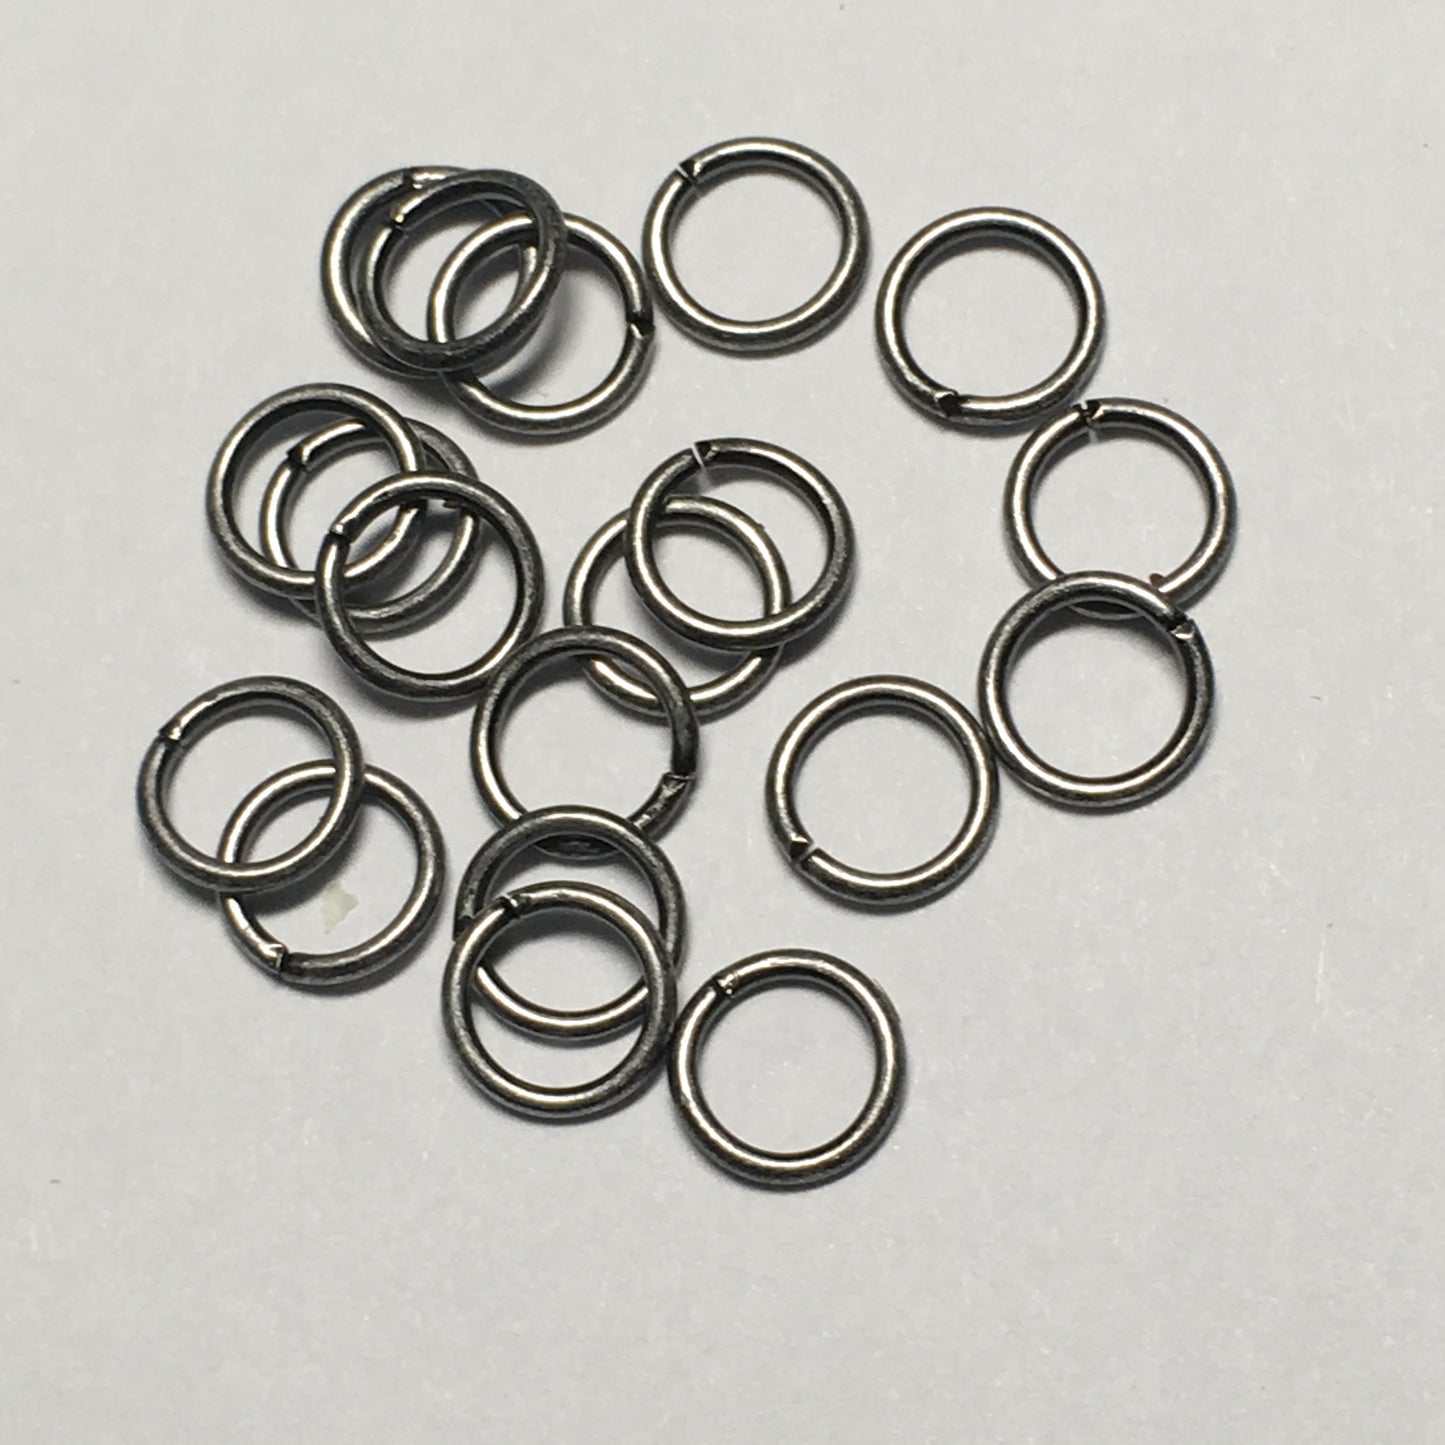 4 mm 21-Gauge Silver Unsoldered Split 0.71 mm Plated Iron Jump Rings - 20 Rings